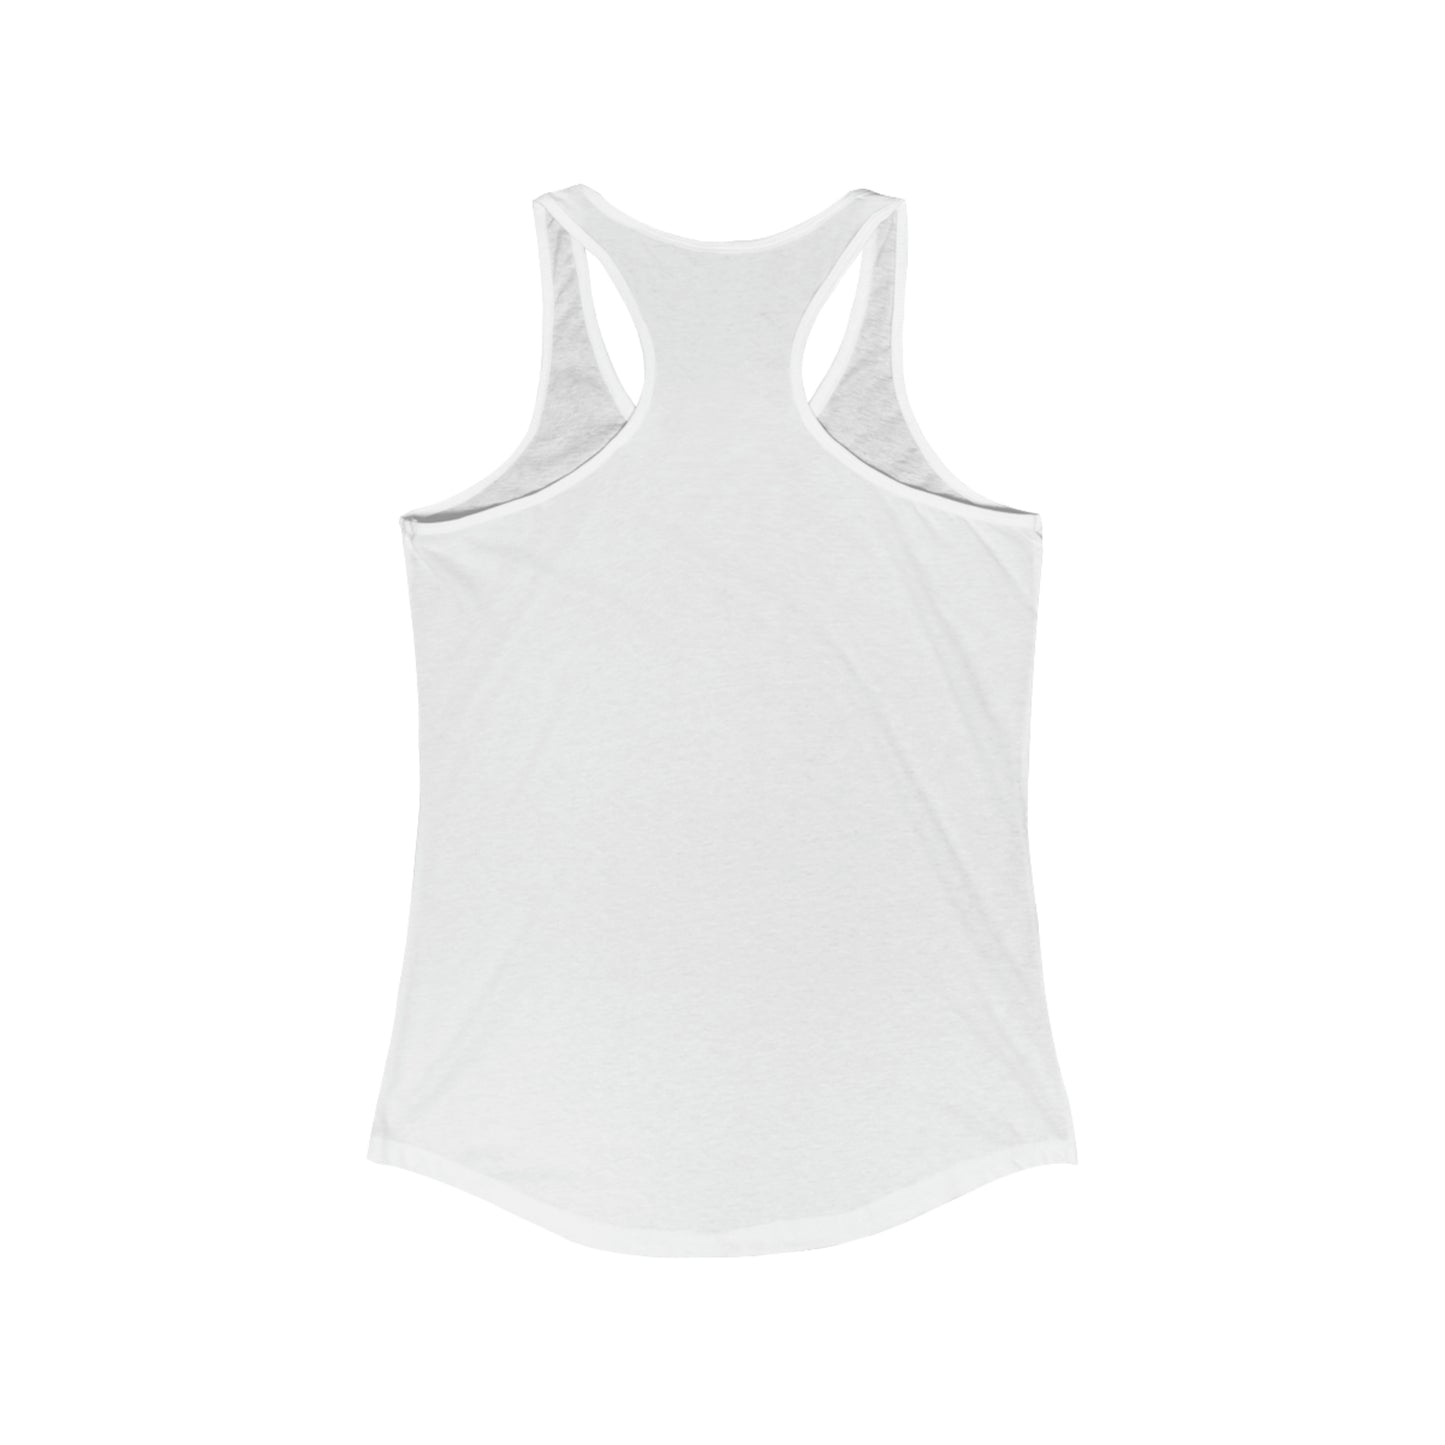 Celebrating the August Moon with a  Women's Ideal Racerback Tank For A Summer Moon Bath